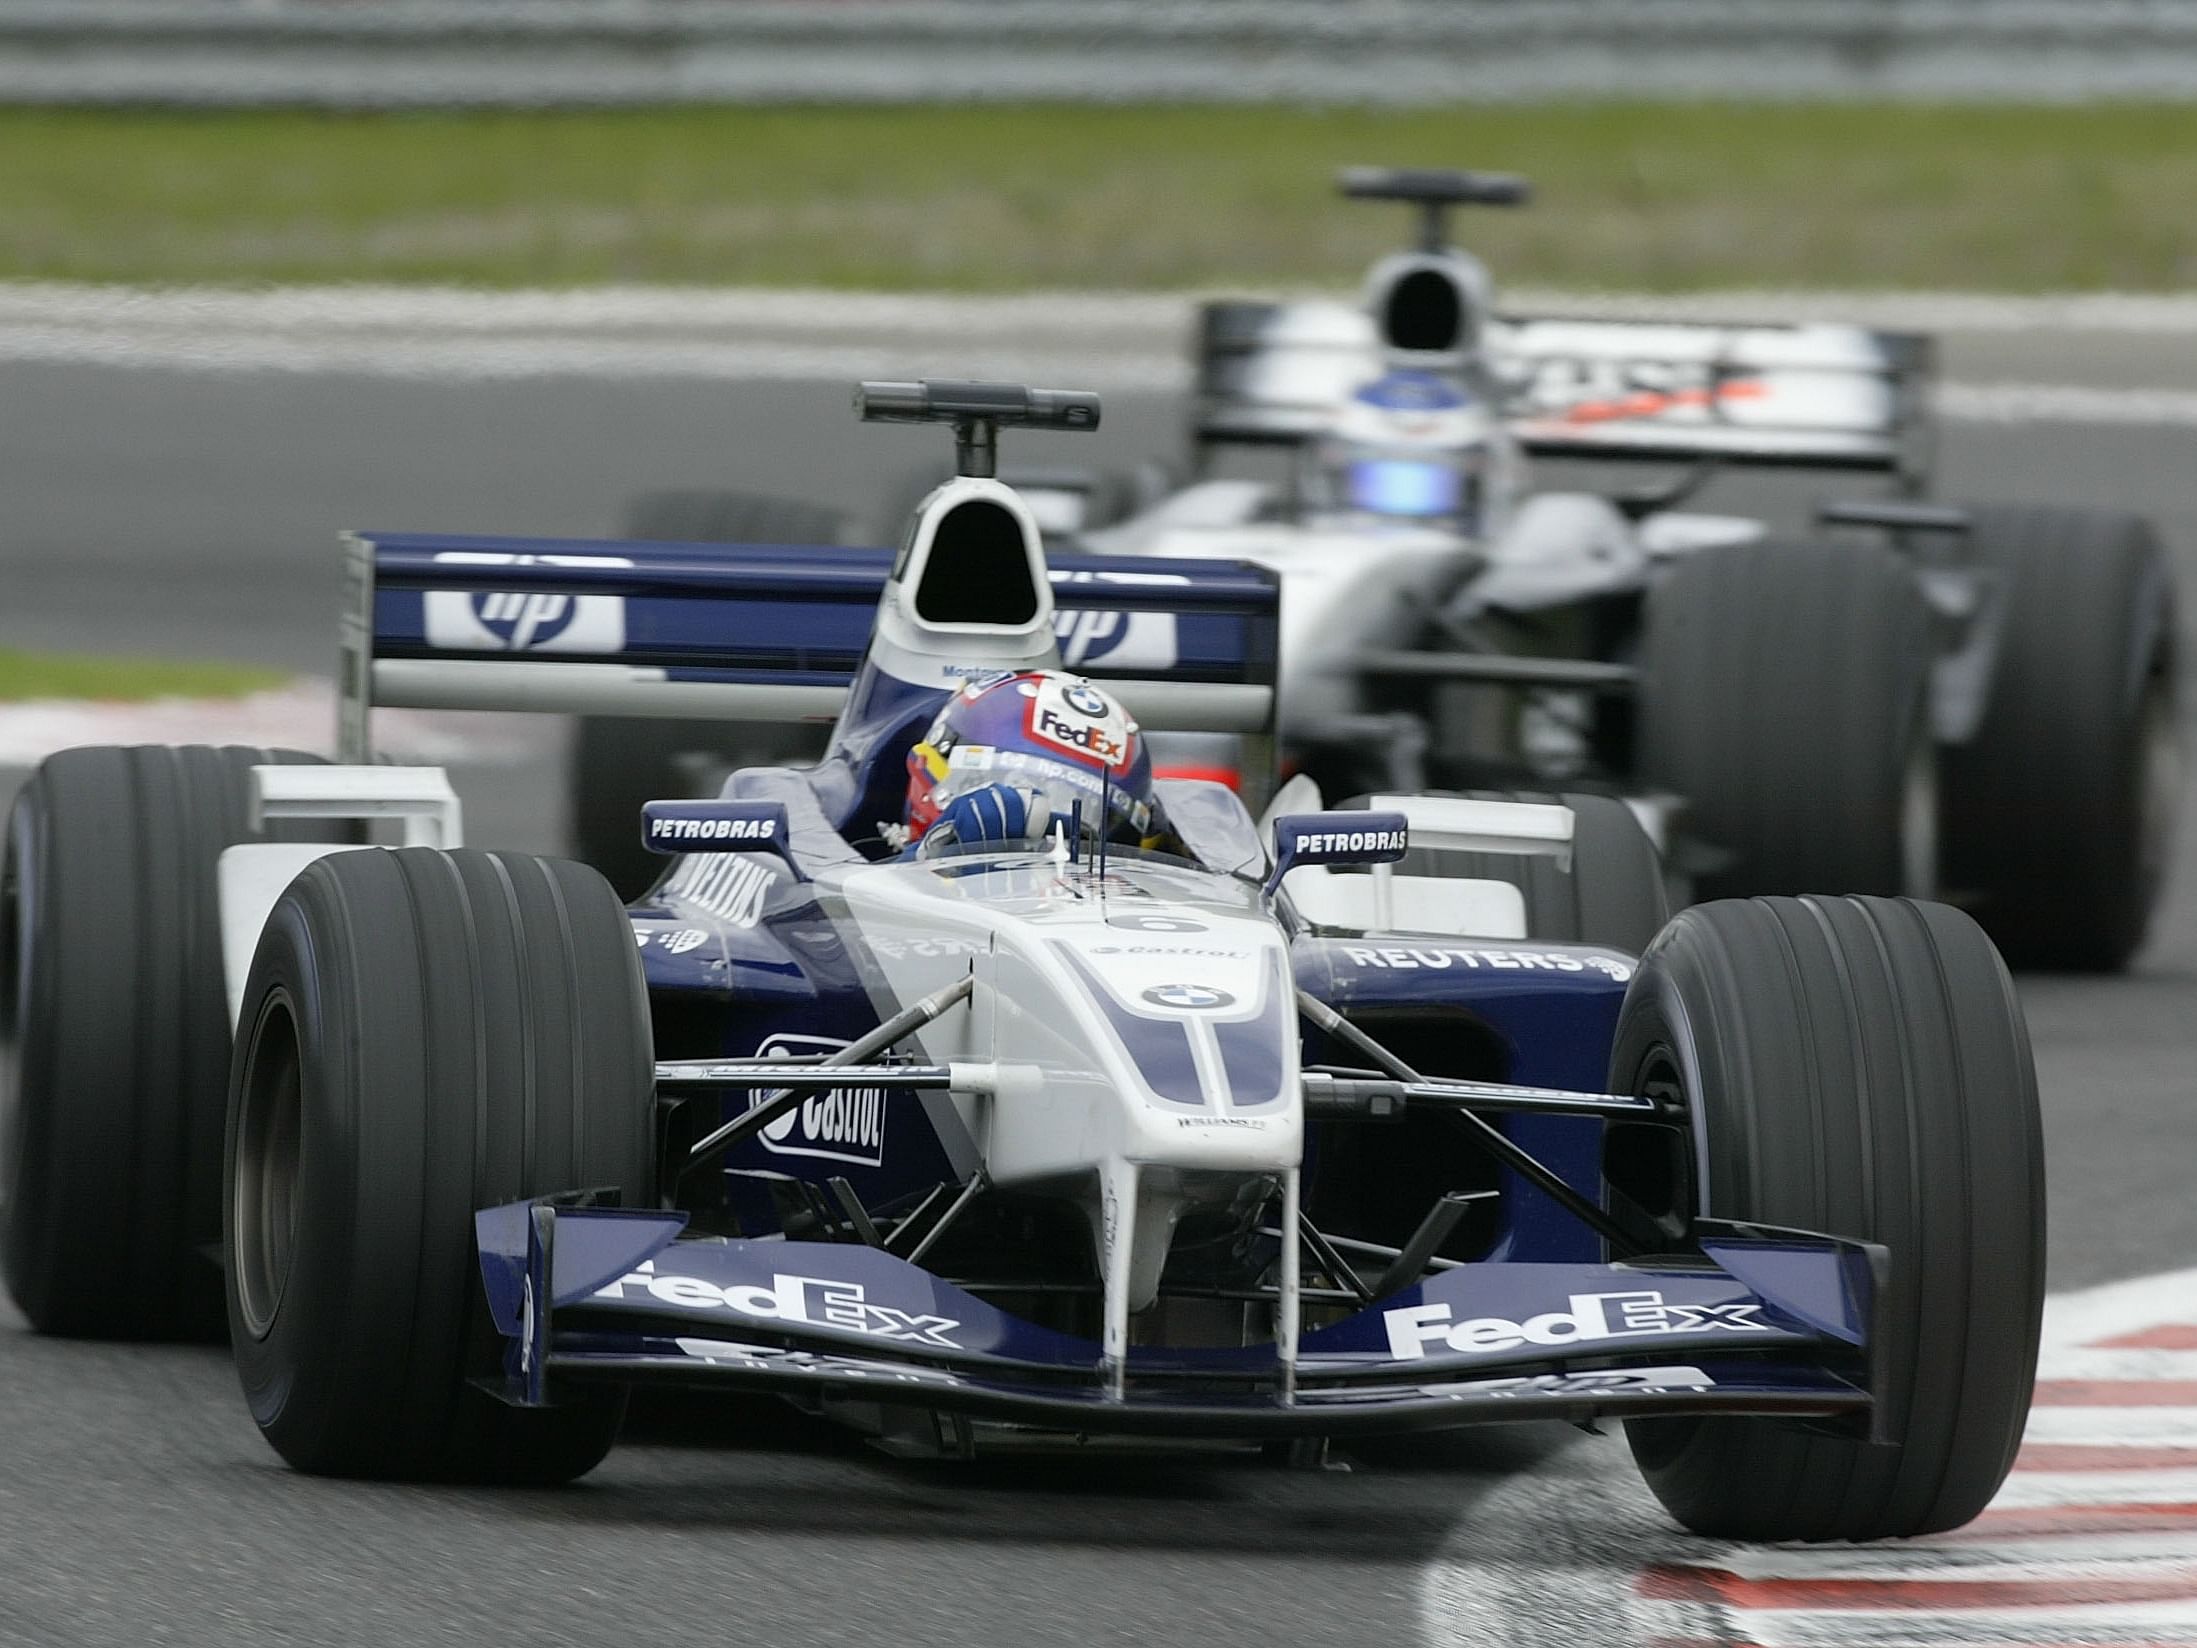 Juan Pablo Montoya is pursued by Kimi Raikkonen during the 2002 F1 Belgian Grand Prix (Photo by Clive Mason/Getty Images)